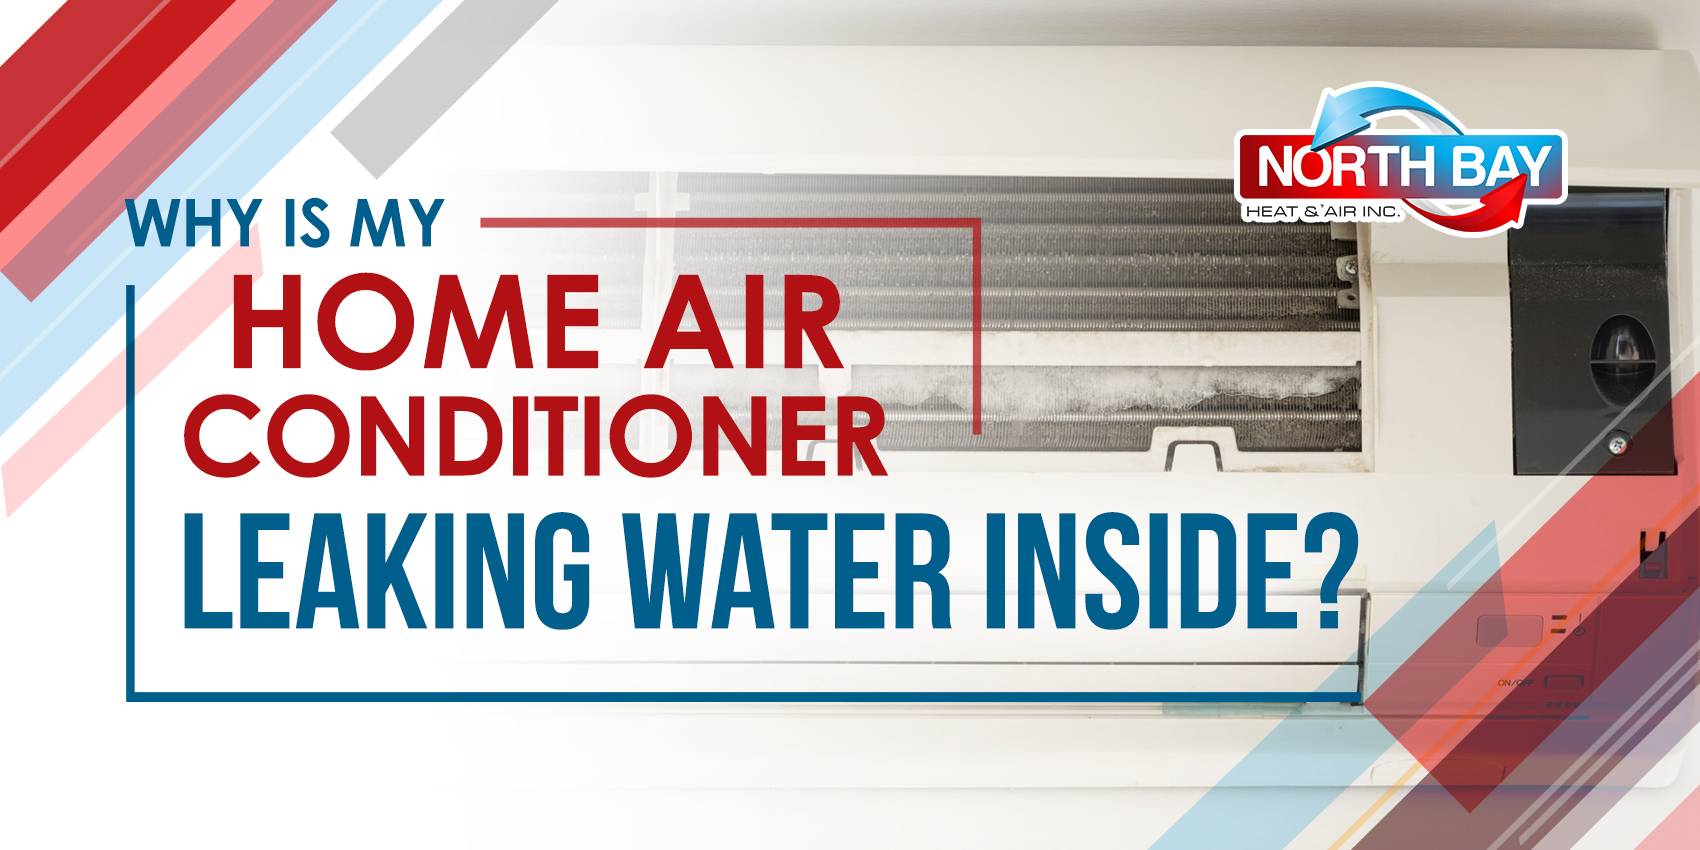 Why is My Home Air Conditioner Leaking Water Inside?